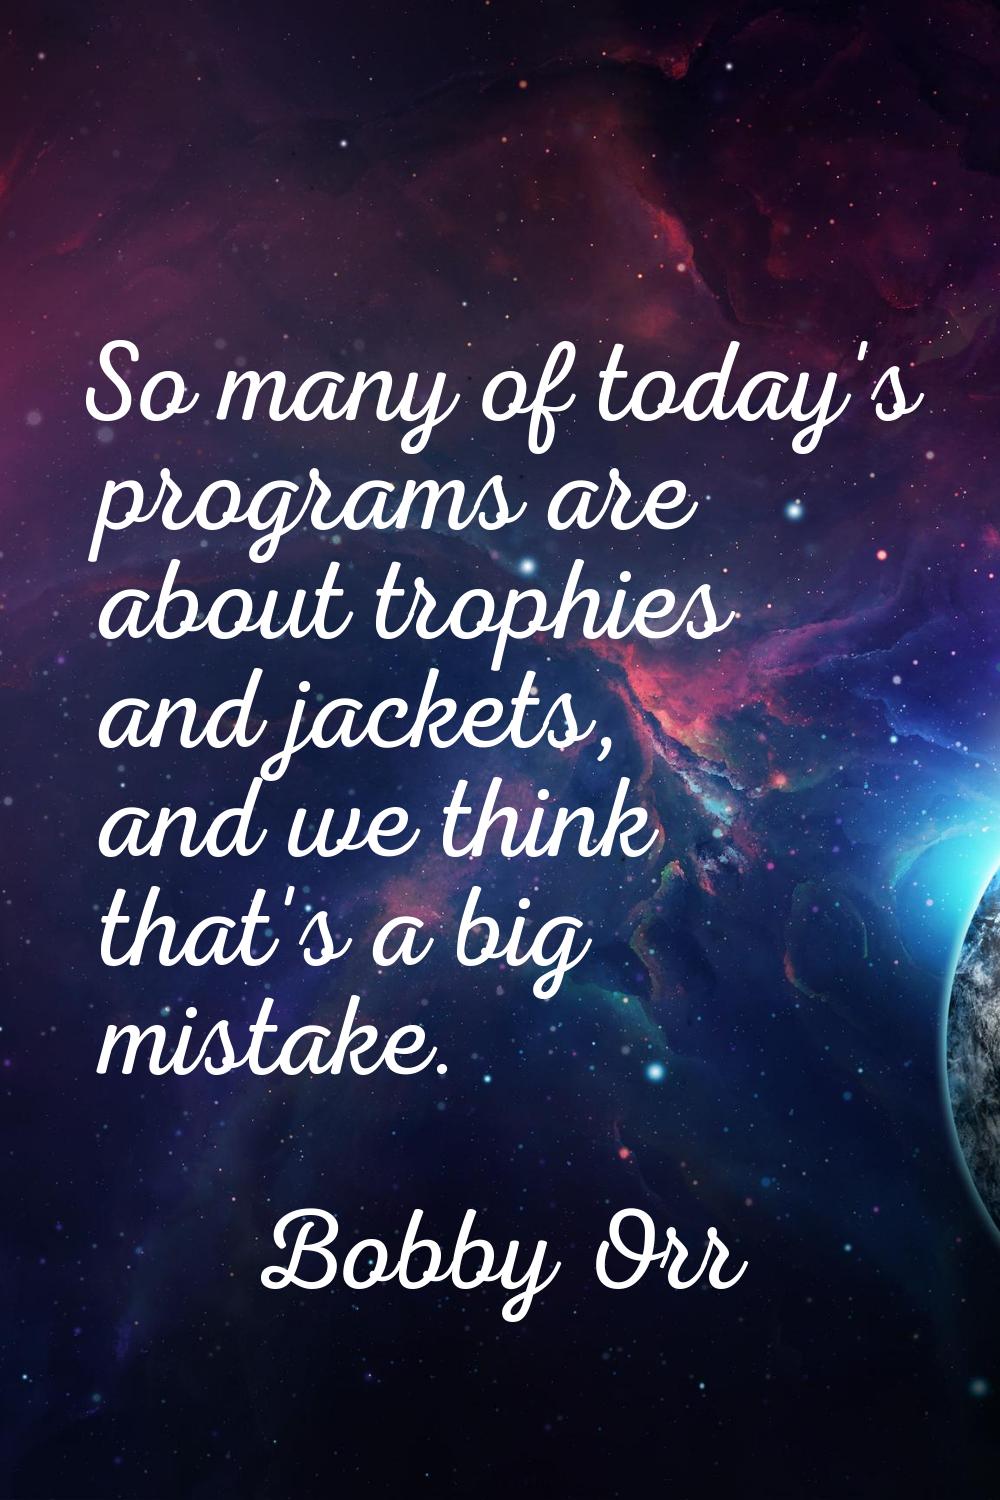 So many of today's programs are about trophies and jackets, and we think that's a big mistake.